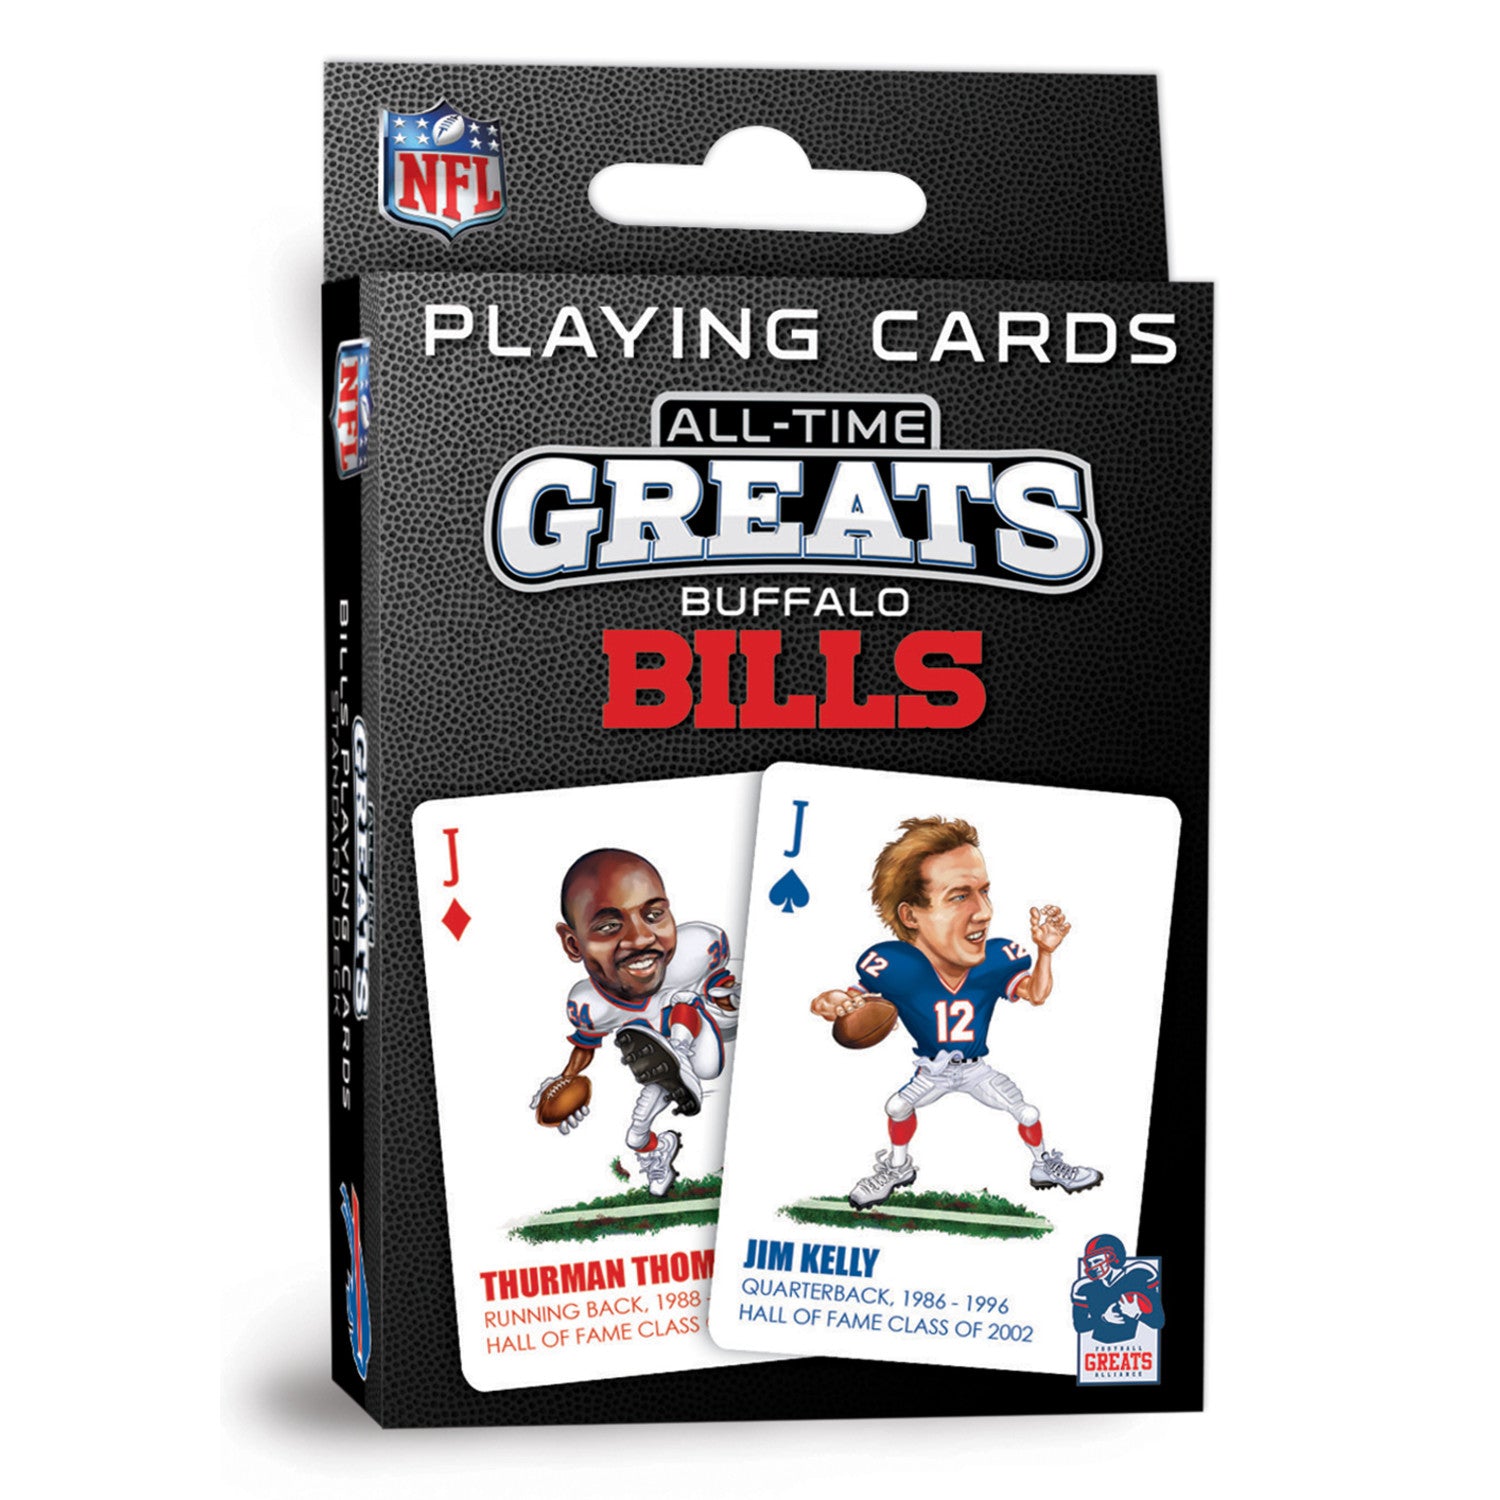 Buffalo Bills All-Time Greats Playing Cards